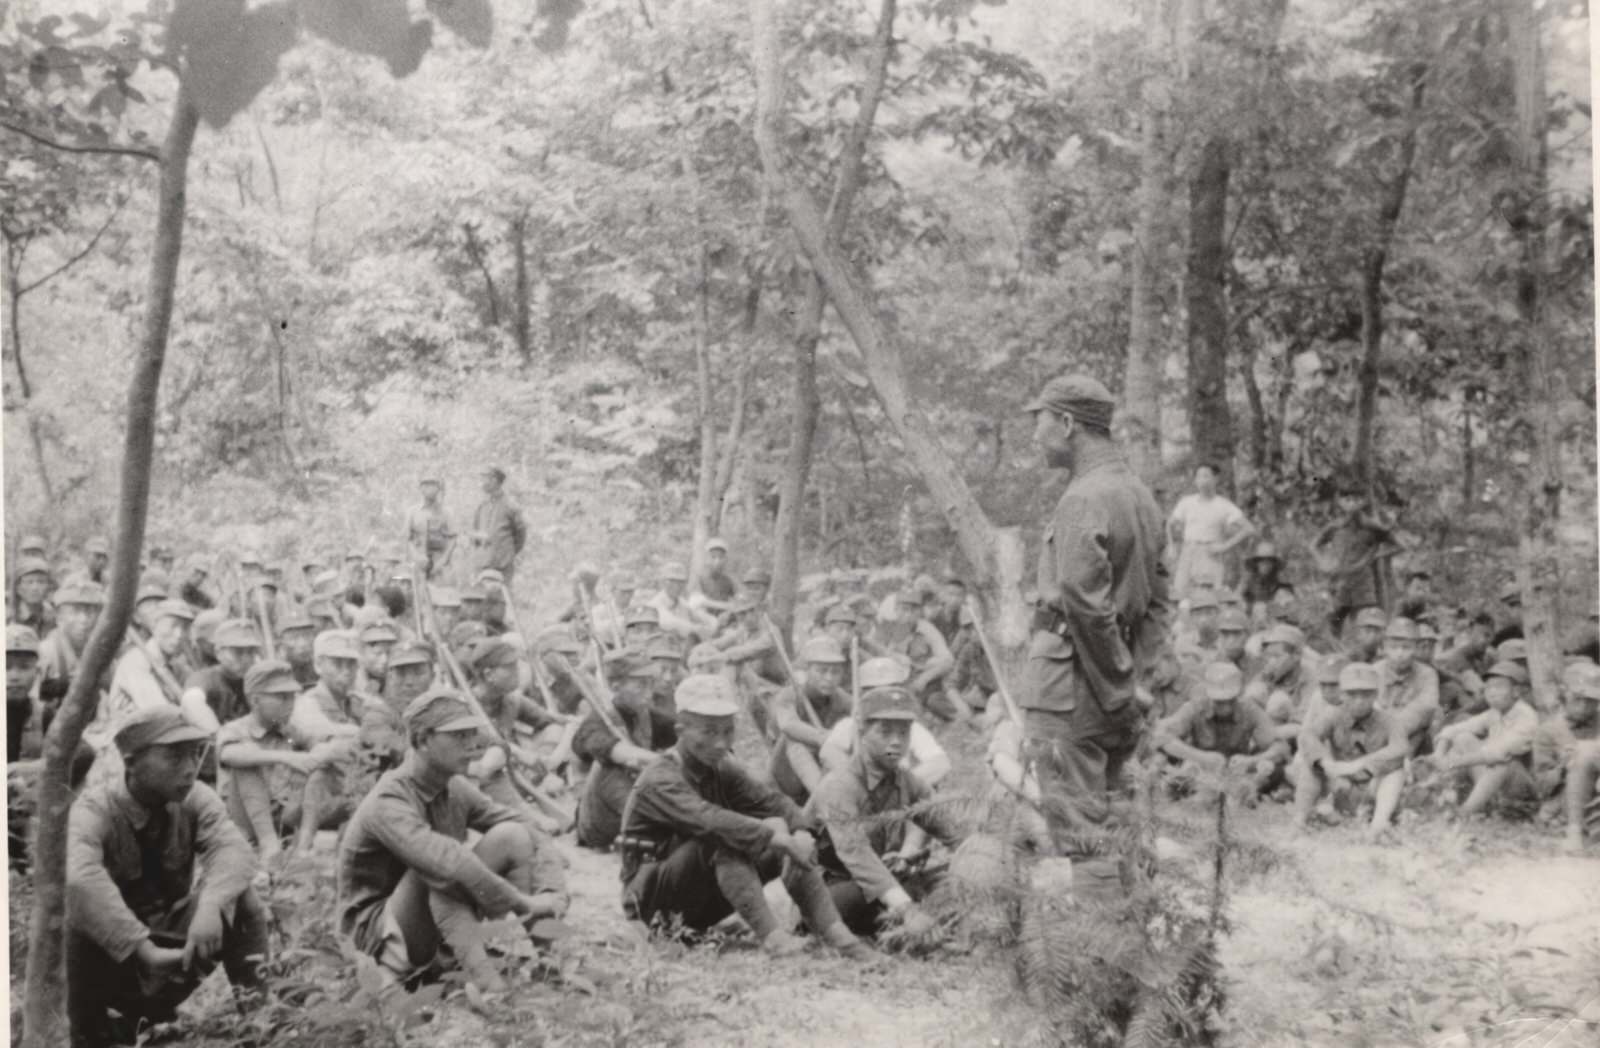 A commander of the New Fourth Army explains to the troops the reason it was necessary to shoot a deserter. 1937-1940